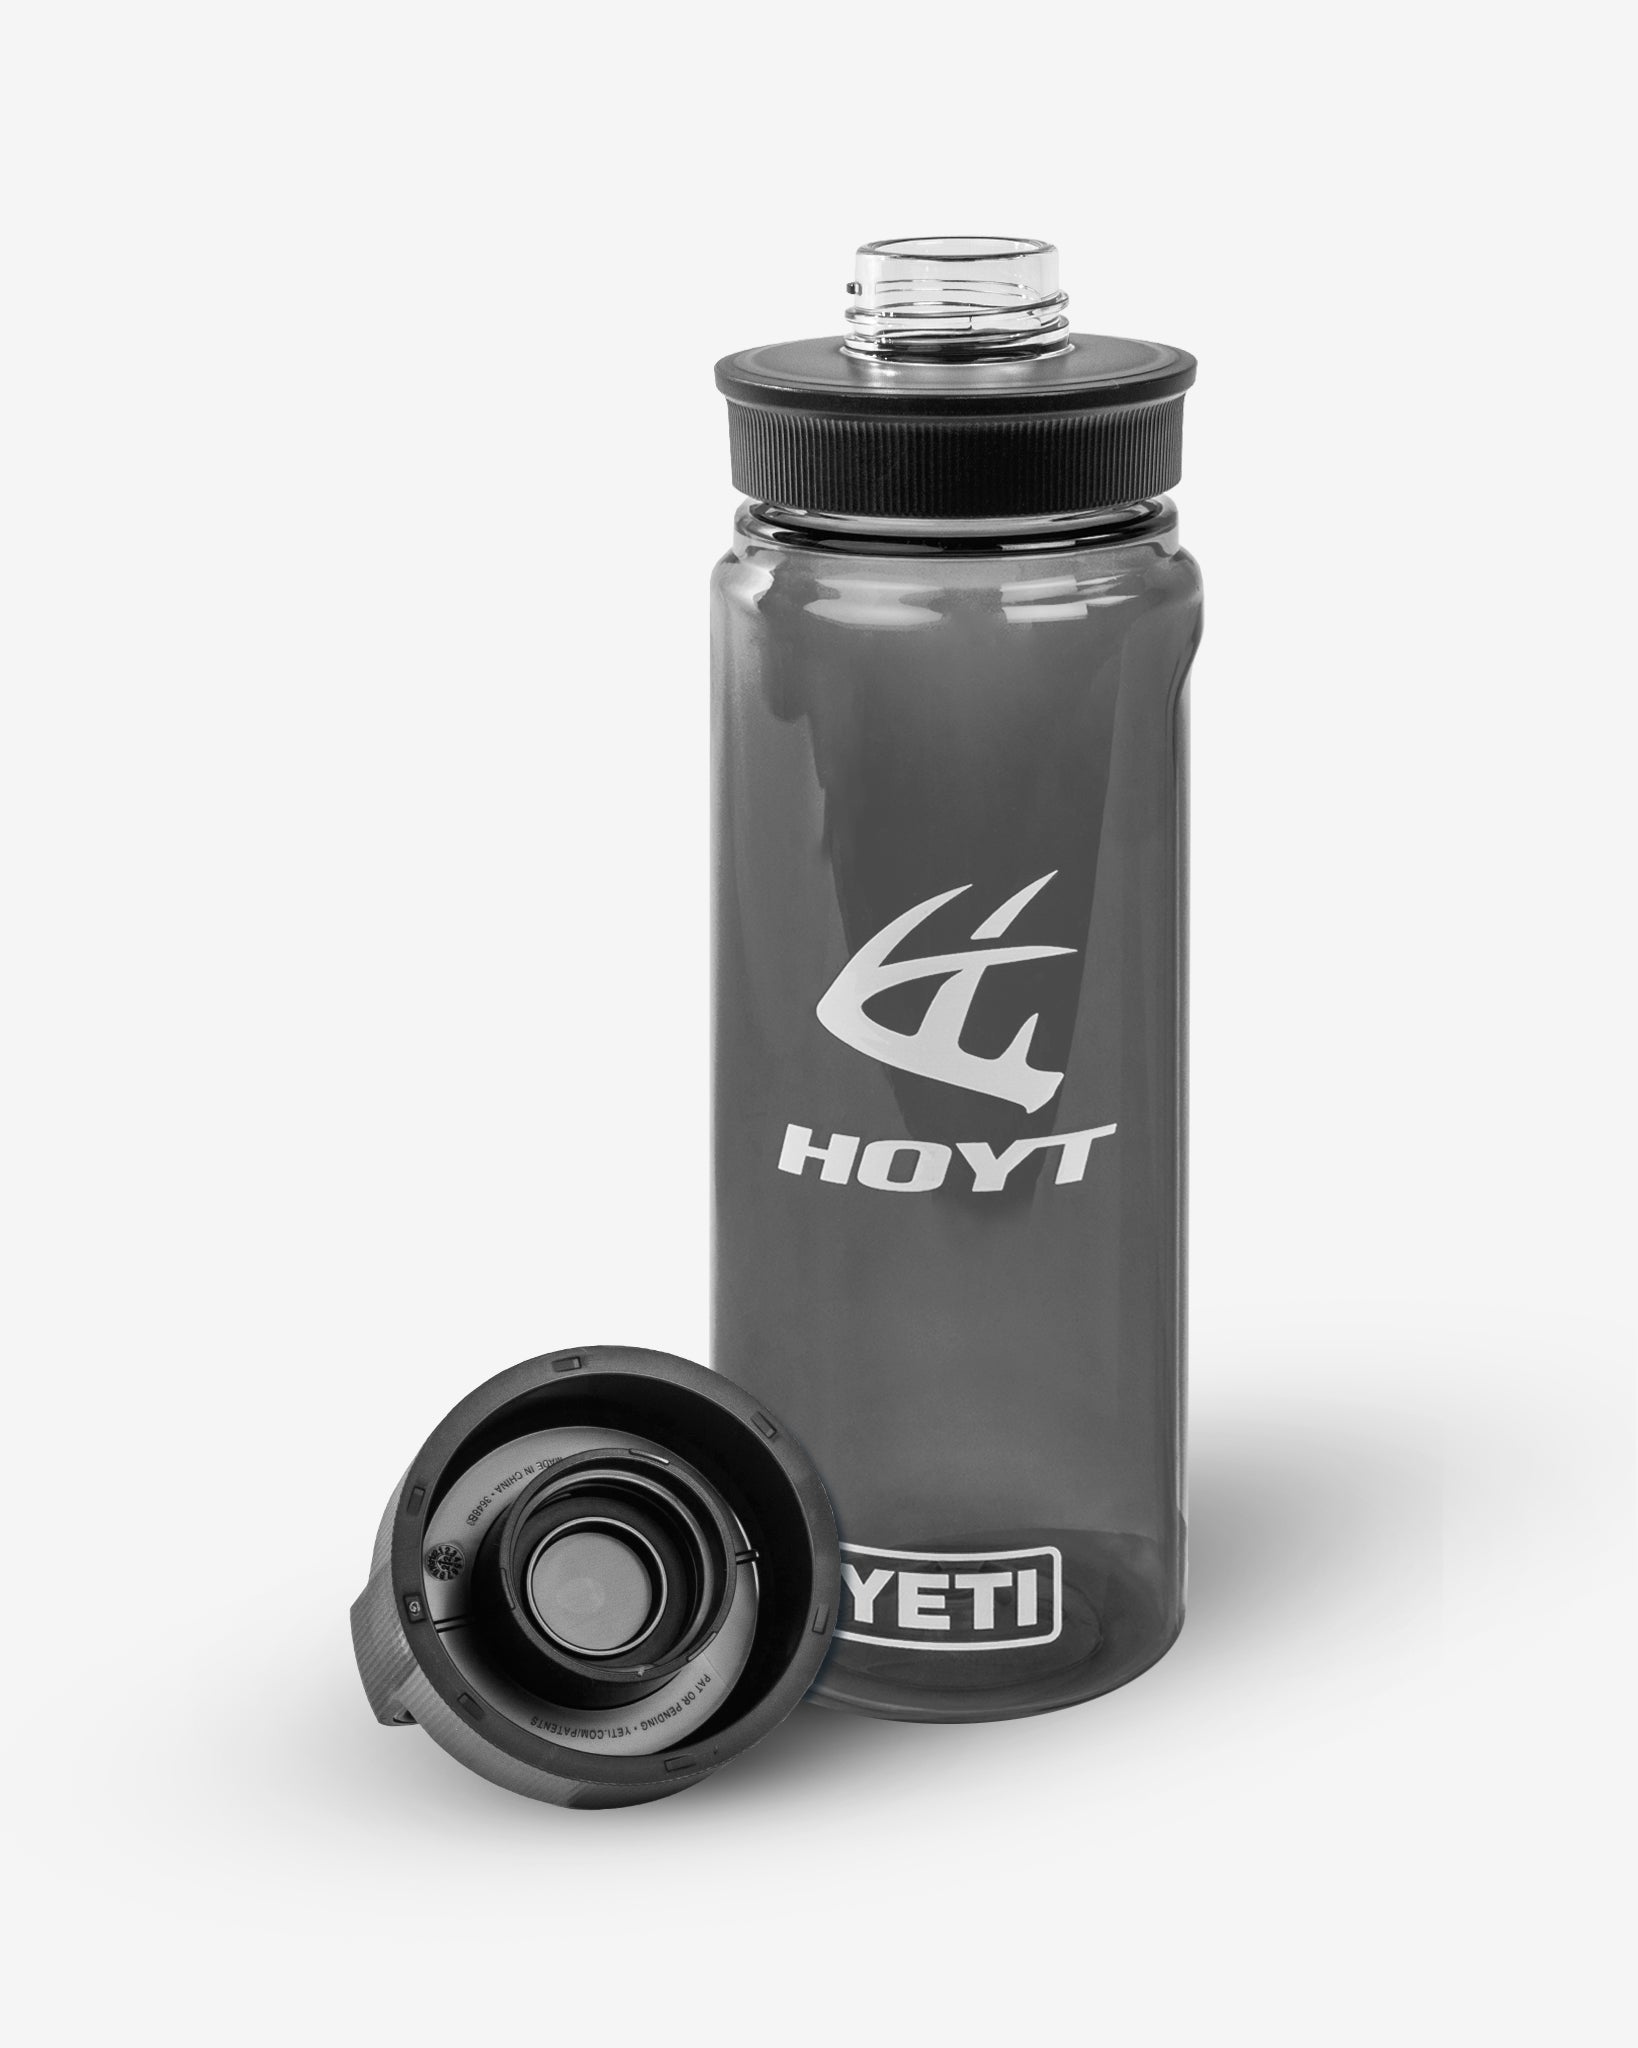 YETI's Yonder Water Bottle Is Its Lightest Ever